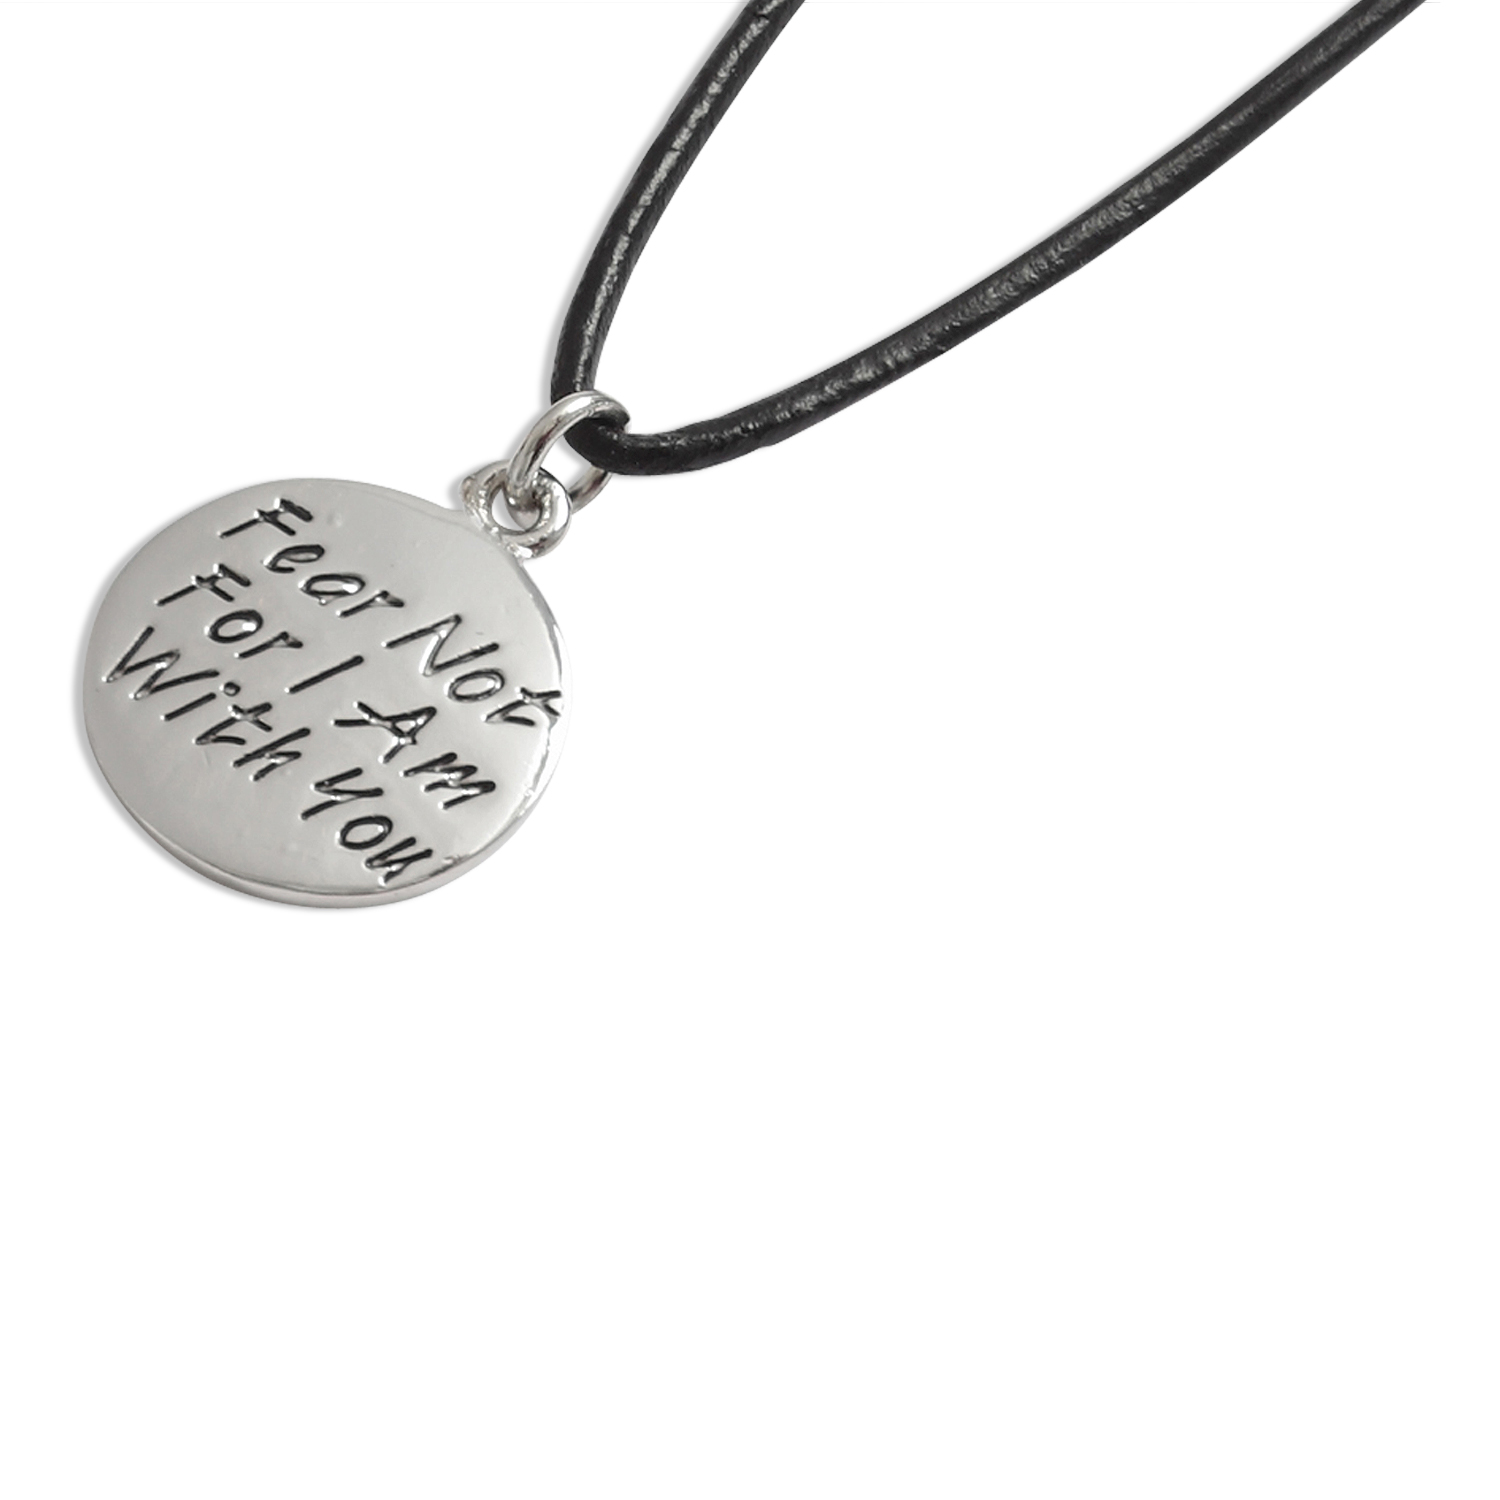 Fear Not For I Am with You' Pendant on Leather Cord